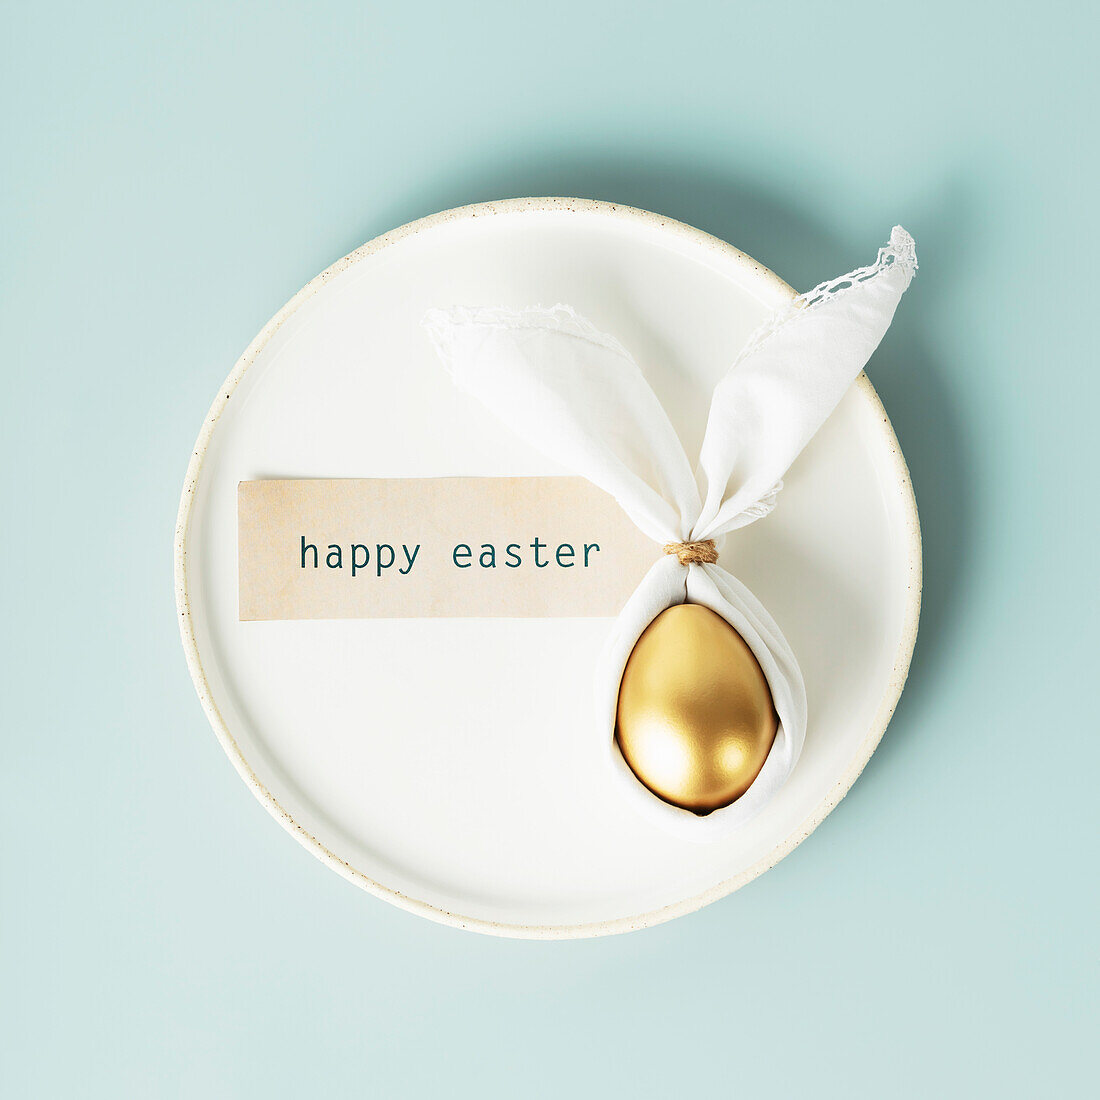 Stylish Easter flat lay with golden egg in Easter bunny napkin on white plate on blue background. Minimalist modern Easter table decorations. Flat lay view from above